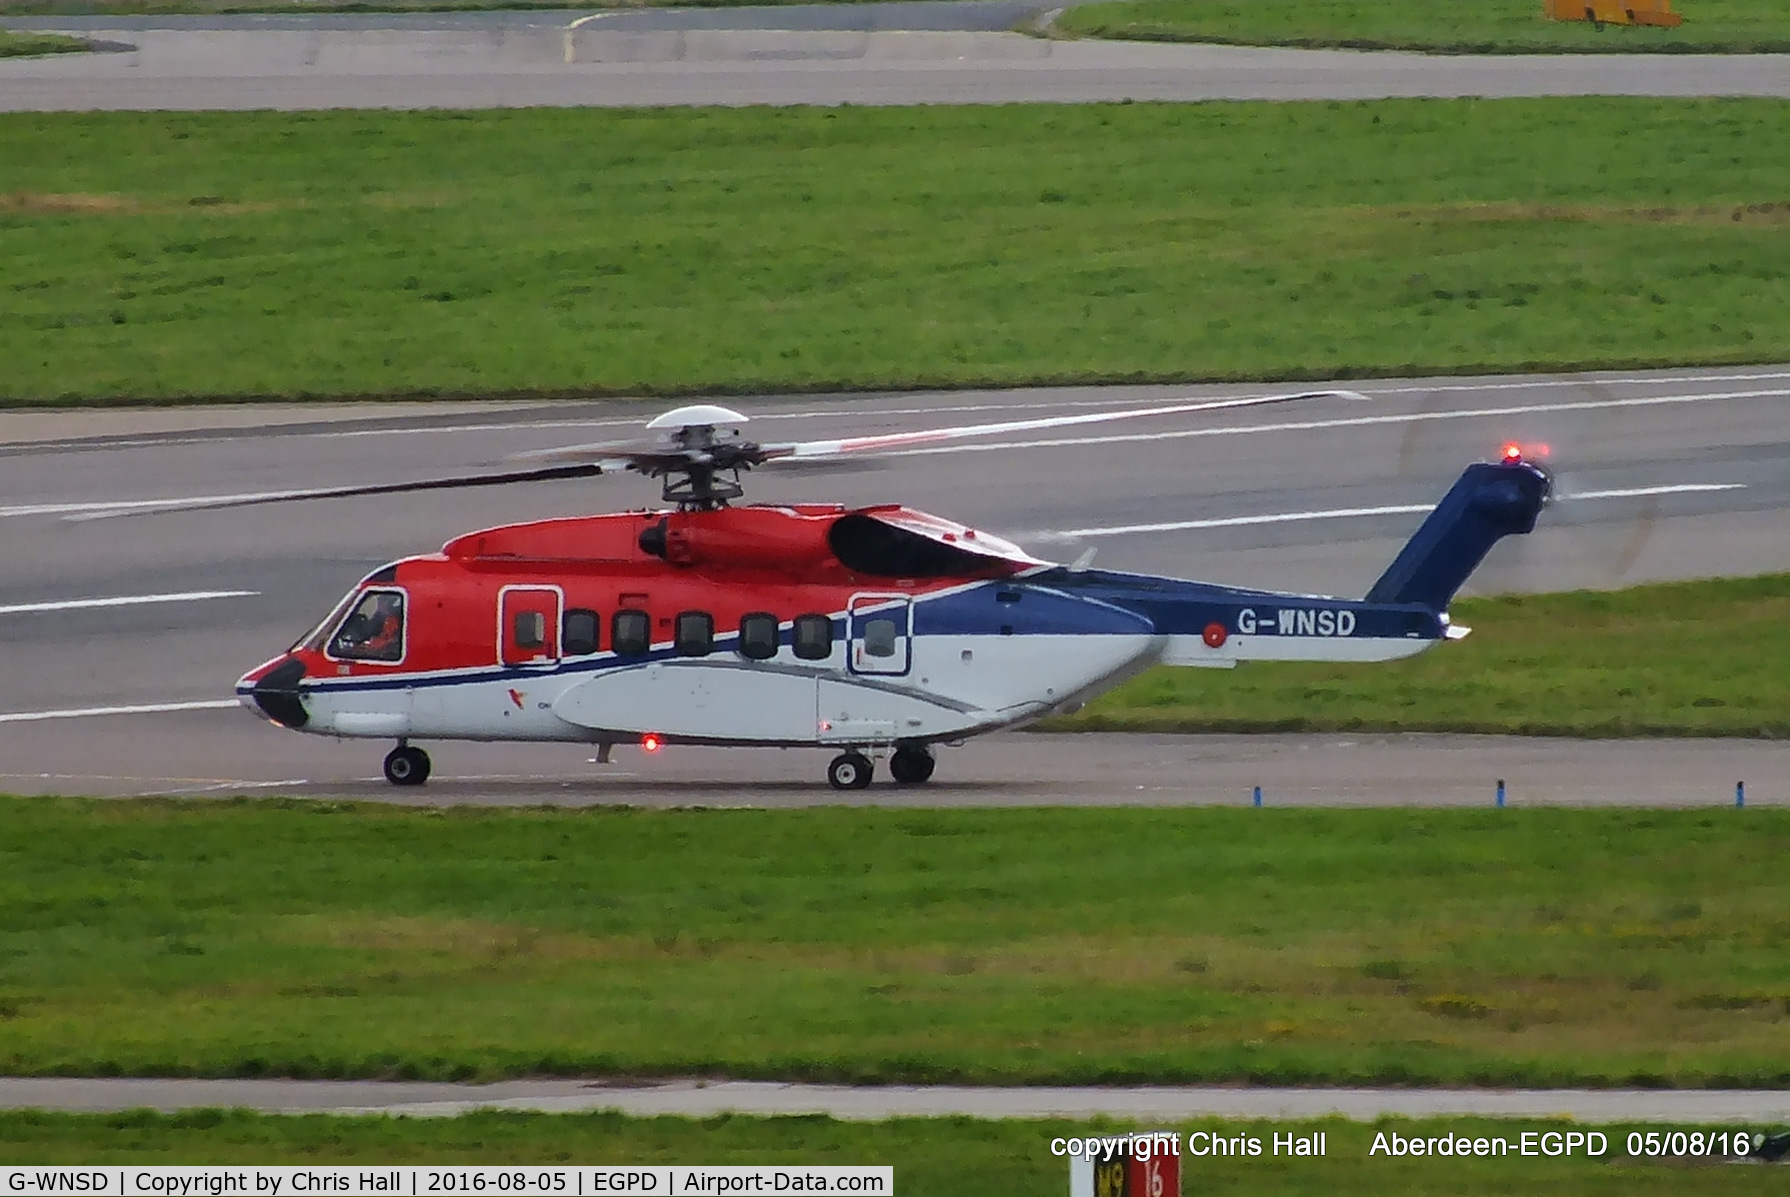 G-WNSD, 2014 Sikorsky S-92A C/N 920231, CHC Scotia